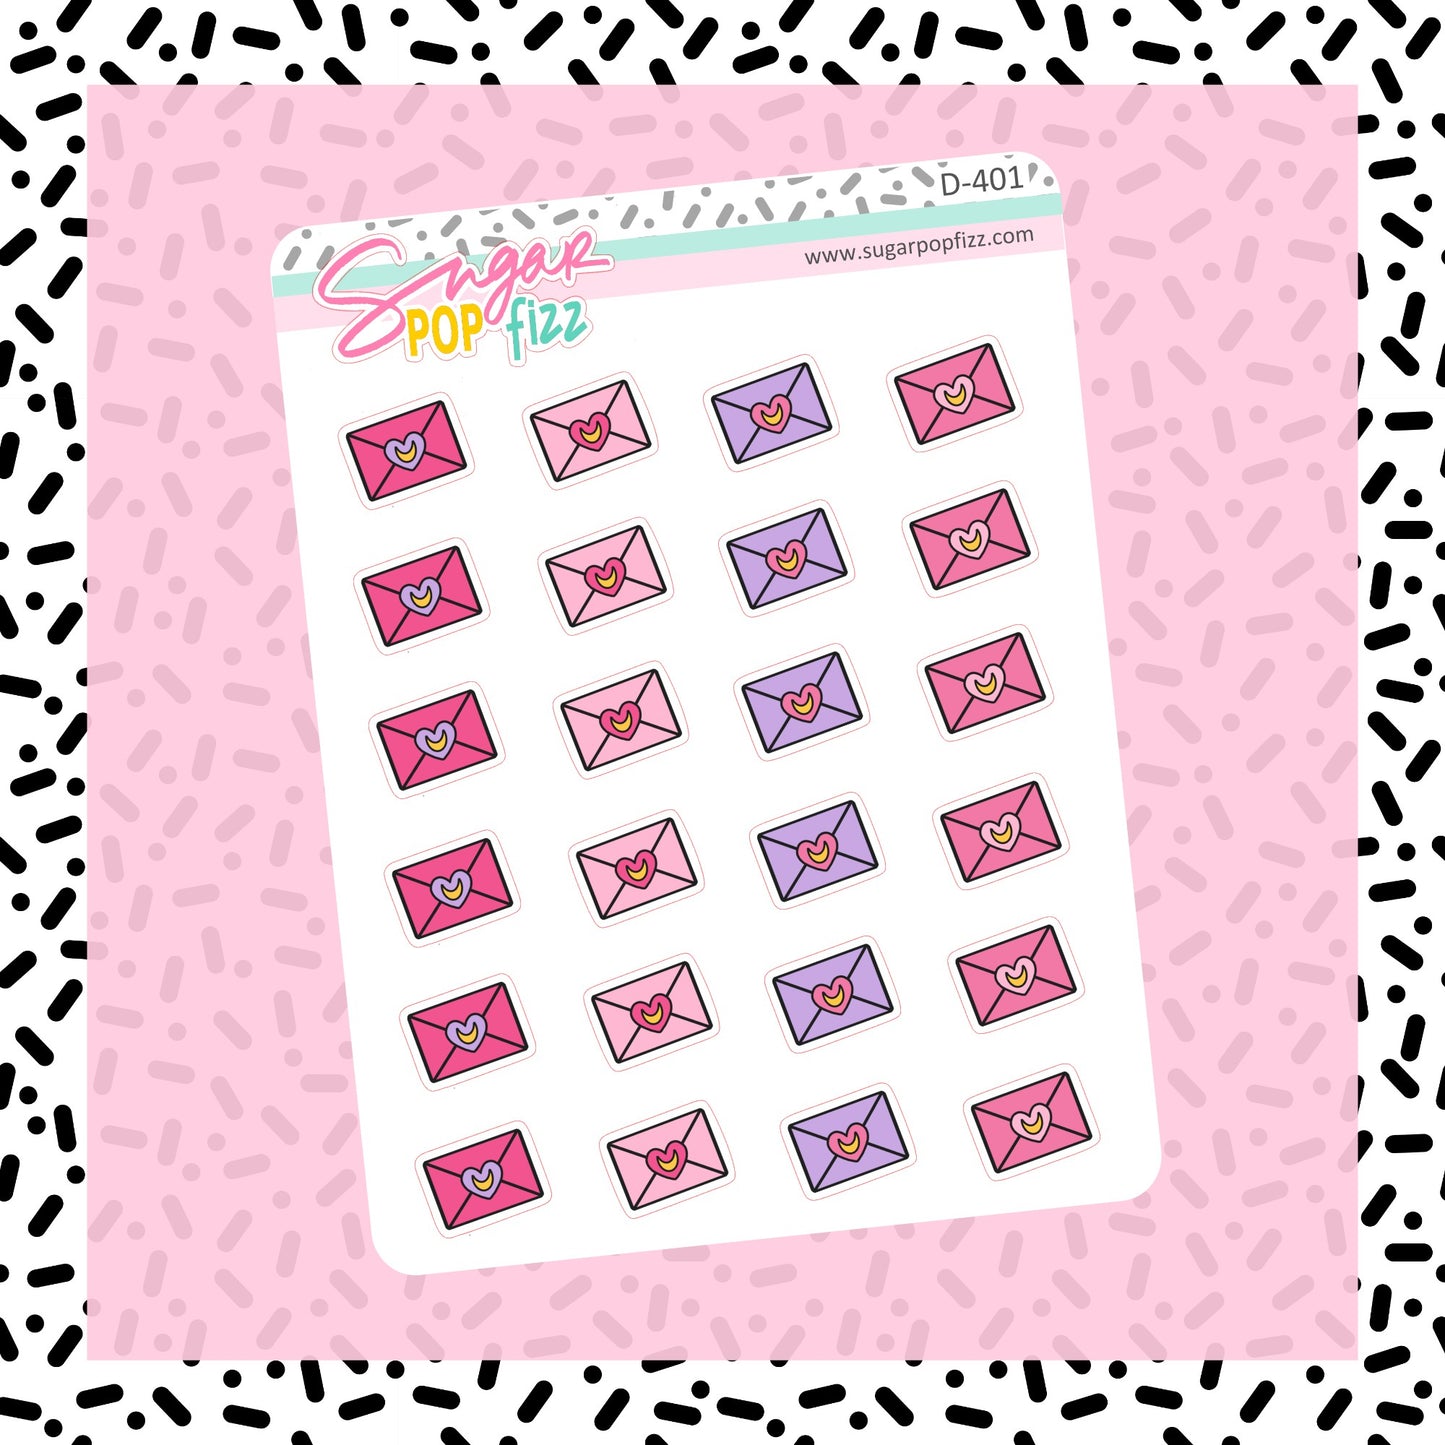 Moonie Mail Doodle Stickers - D401